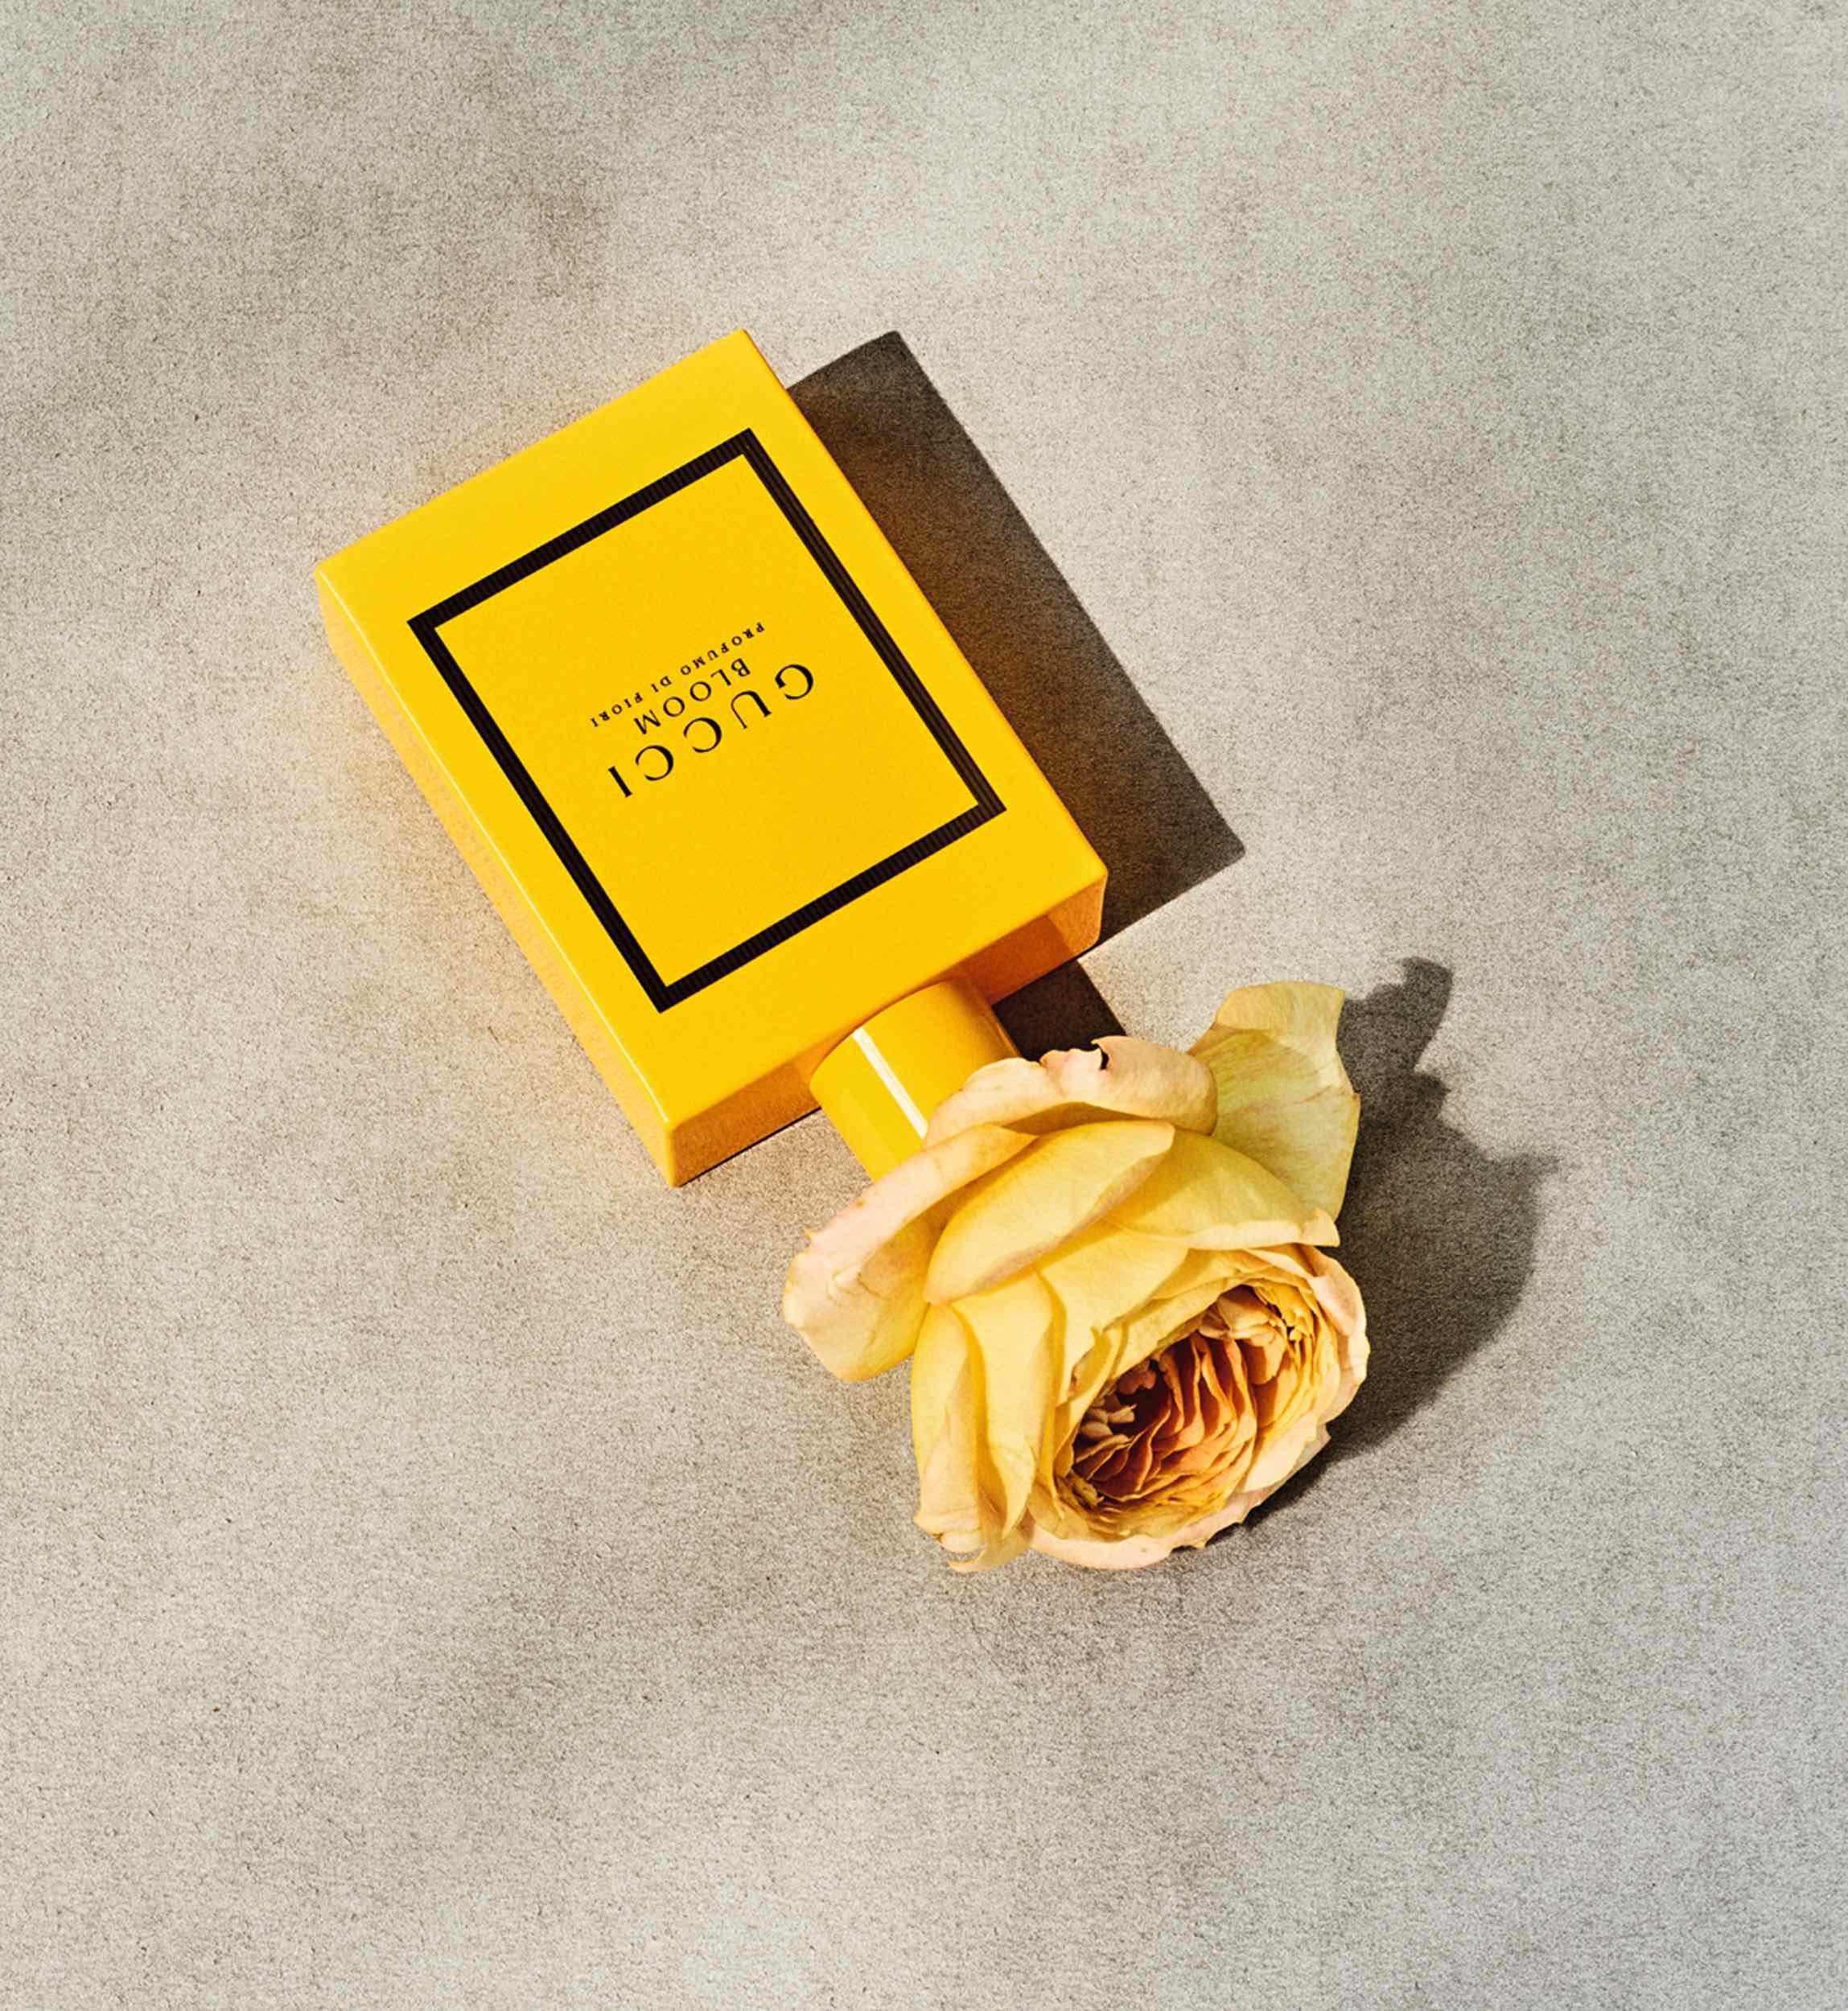 This Gucci Fragrance Is an Ode to Flowers | AnOther